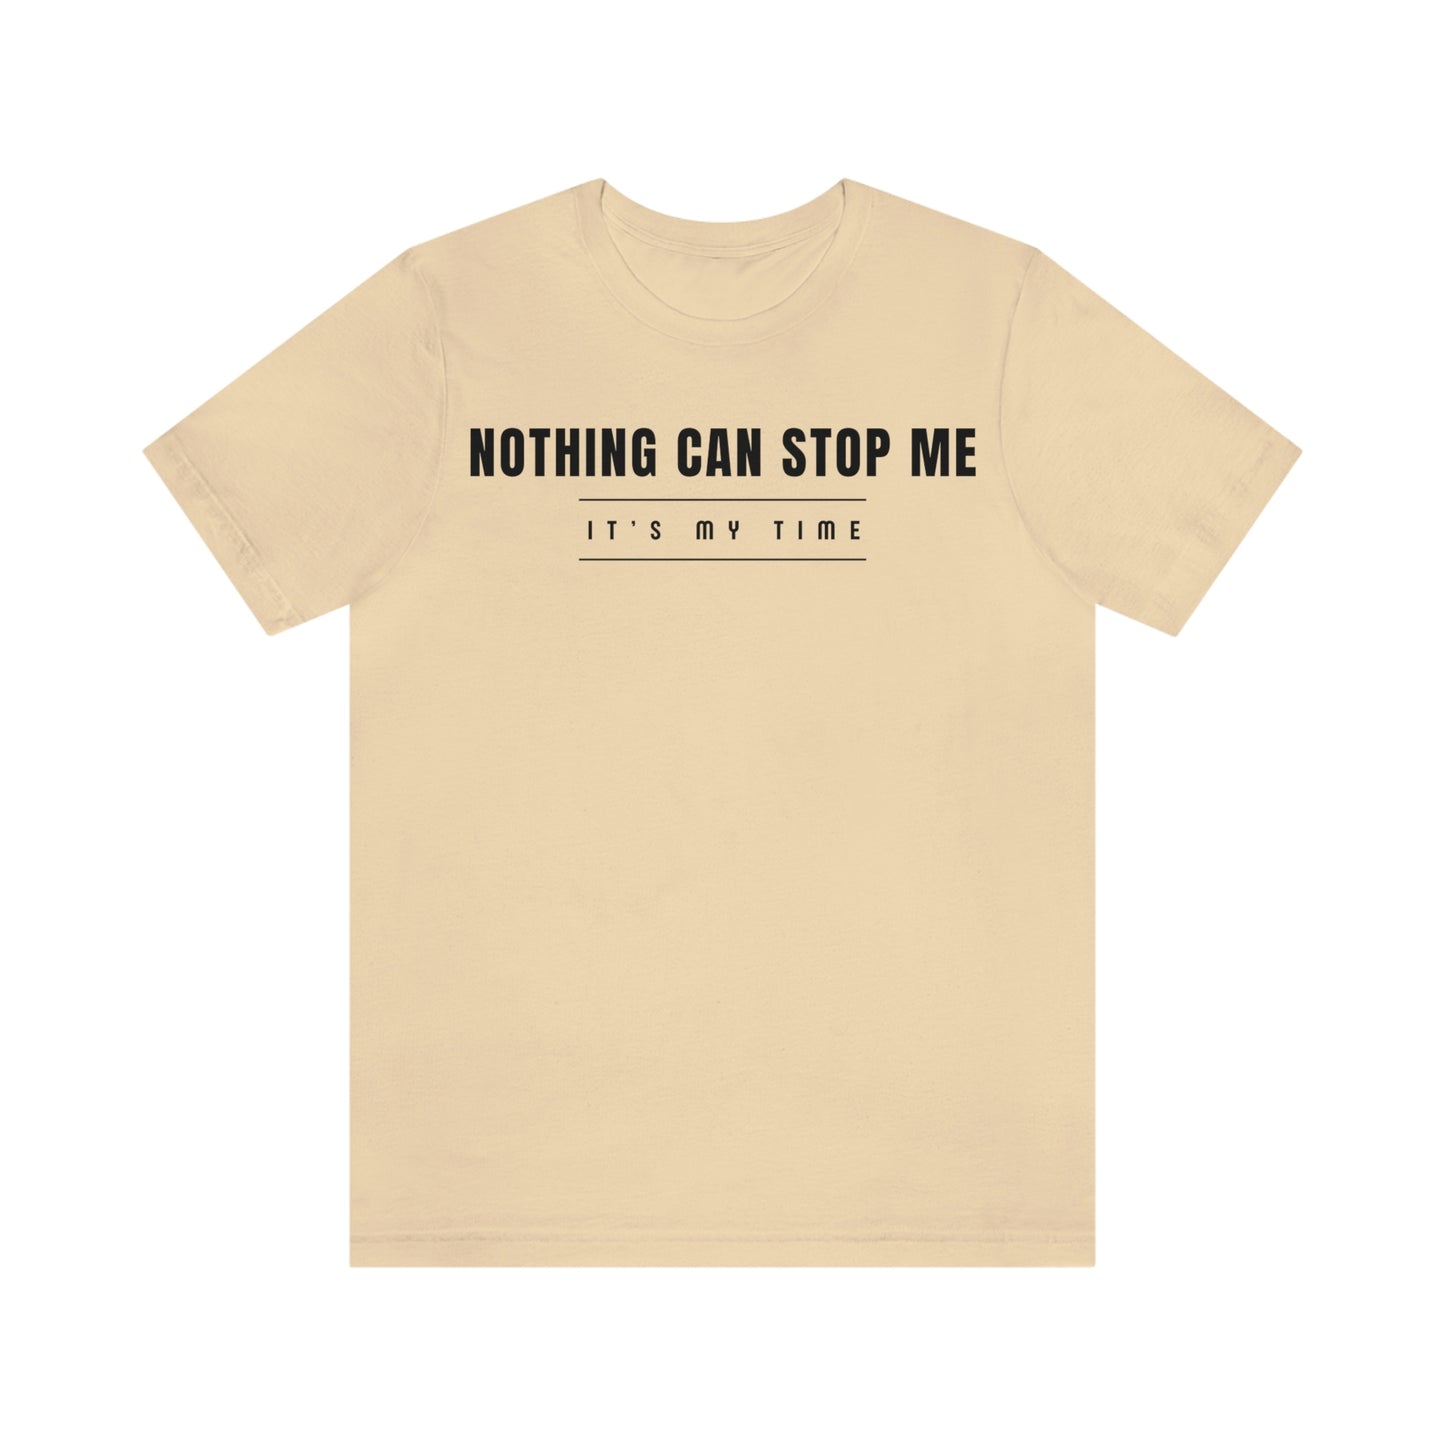 The “Nothing Can Stop Me” T-Shirt